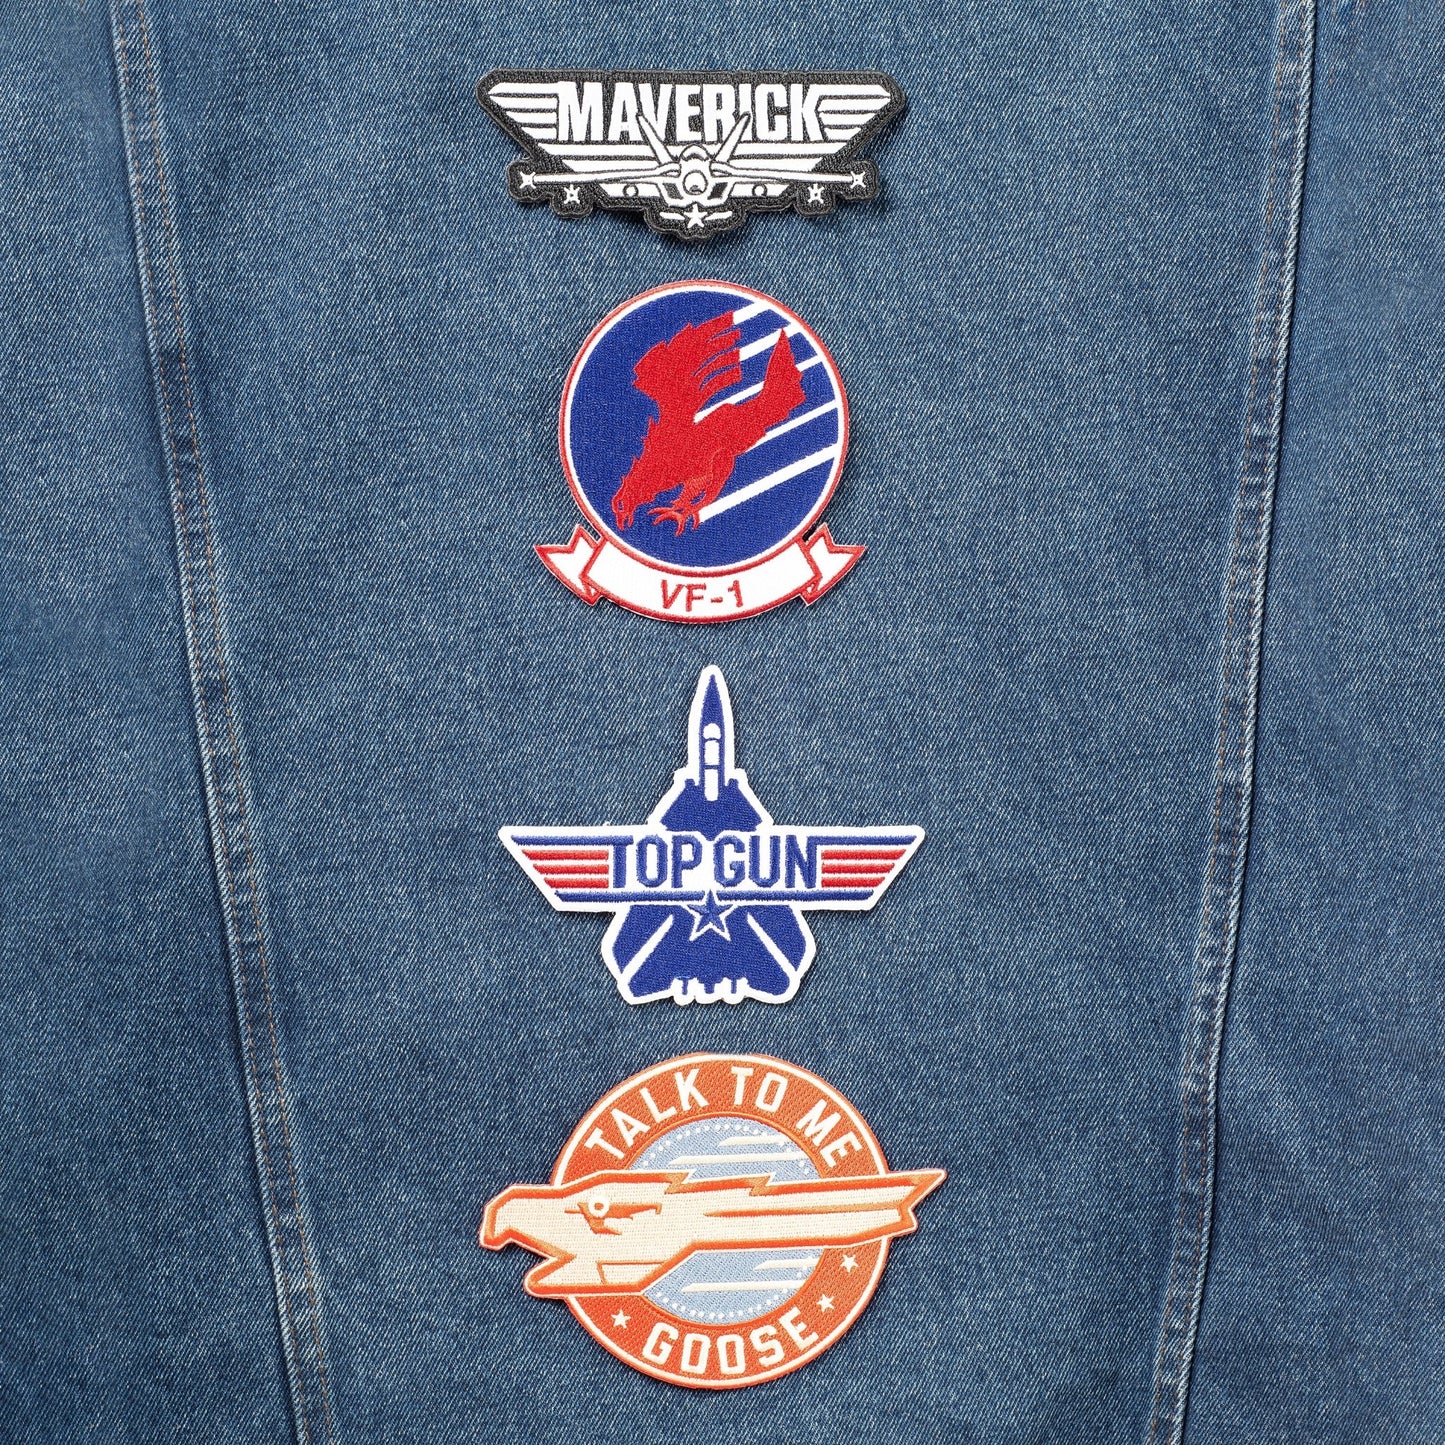 Top Gun VF - 1 Embroidered Patch - Paramount Shop